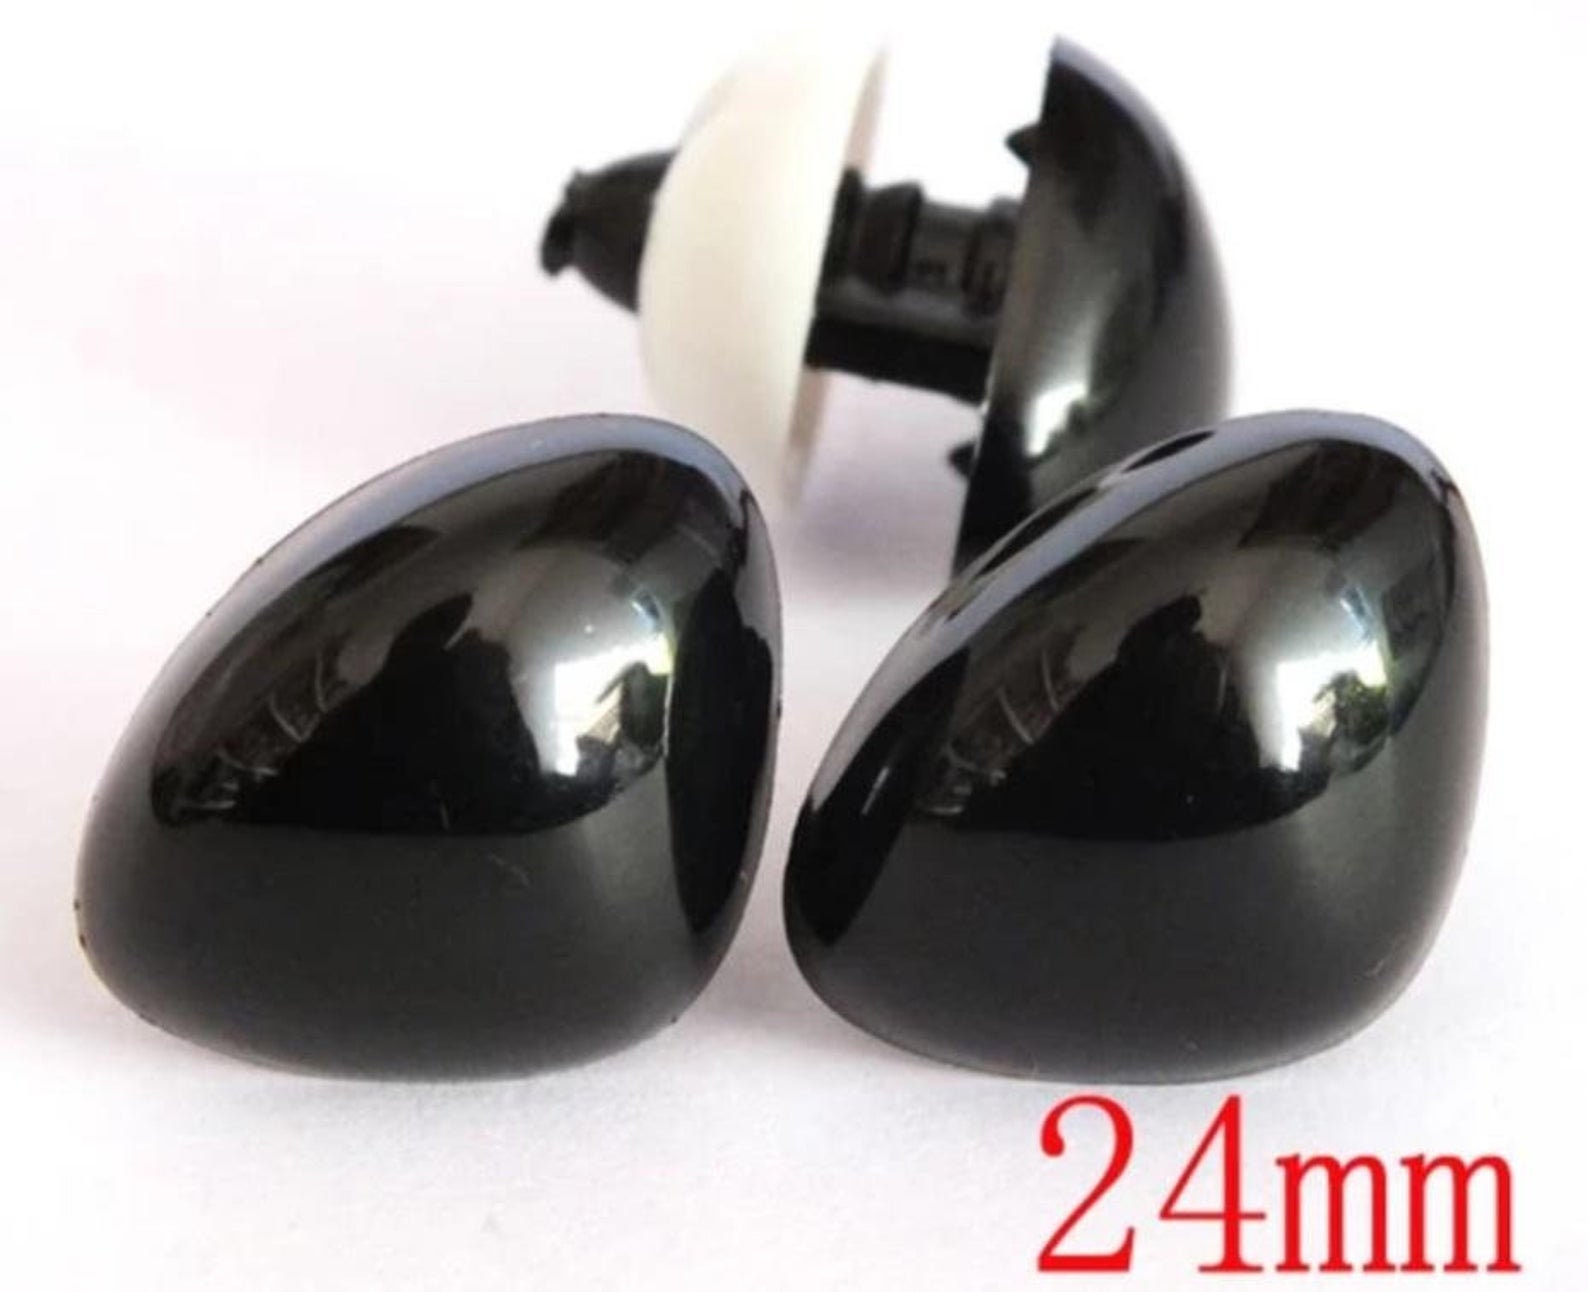 Limited Quantity! 23mm Solid Black Safety Noses with Washer - 2 ct -  Amigurumi / Dog / Bear / Creation / Animal / Toy / Crochet / Amigurumi